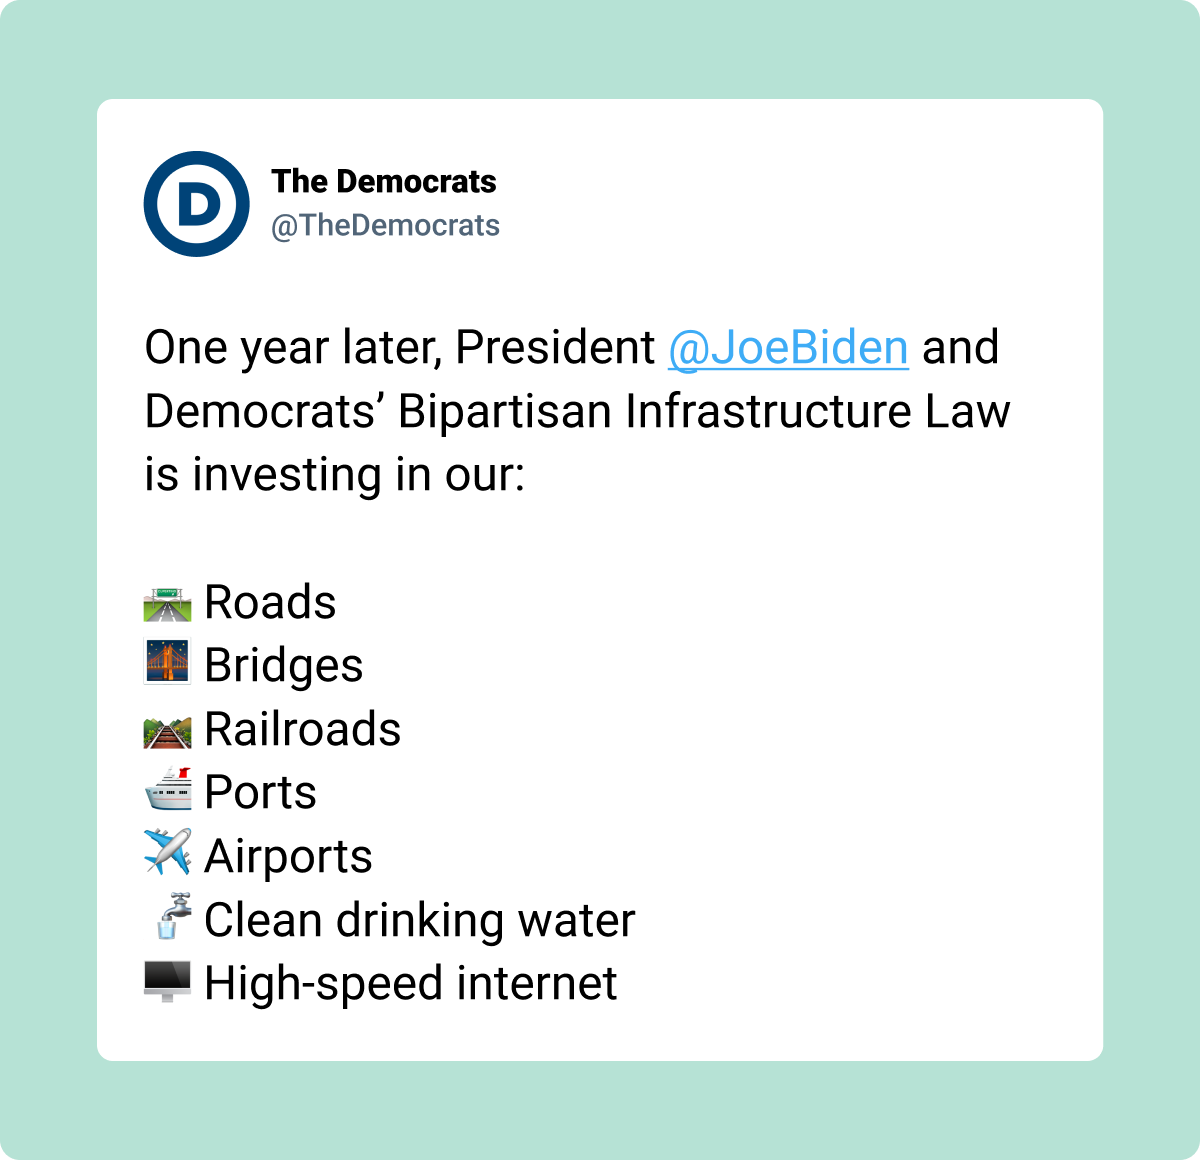 Tweet from @TheDemocrats: 'One year later, President @JoeBiden and Democrats' Bipartisan Infrastructure Law is investing in our: roads, bridges, railroads, ports, airports, clean drinking water, high-speed internet